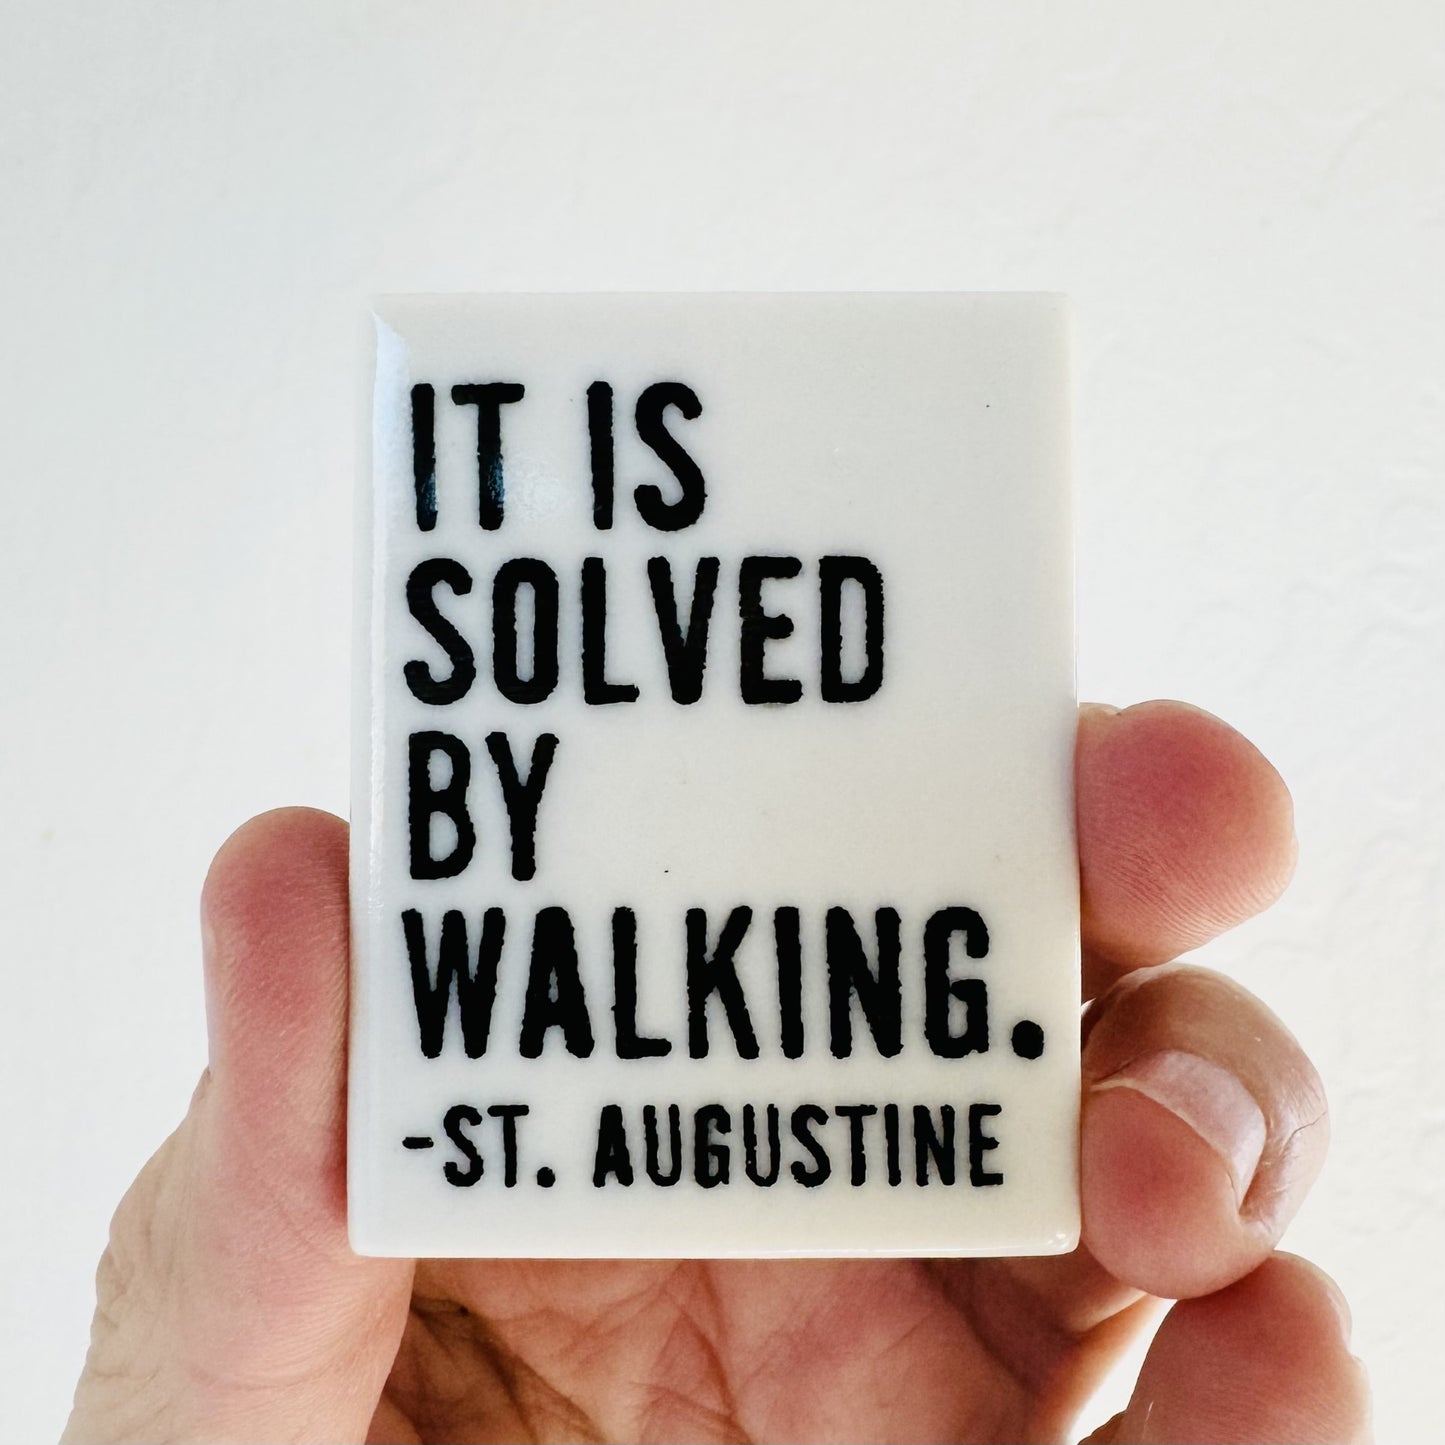 it is solved by walking. -st augustine quote ceramic magnet 1.5" w x 2.06" h